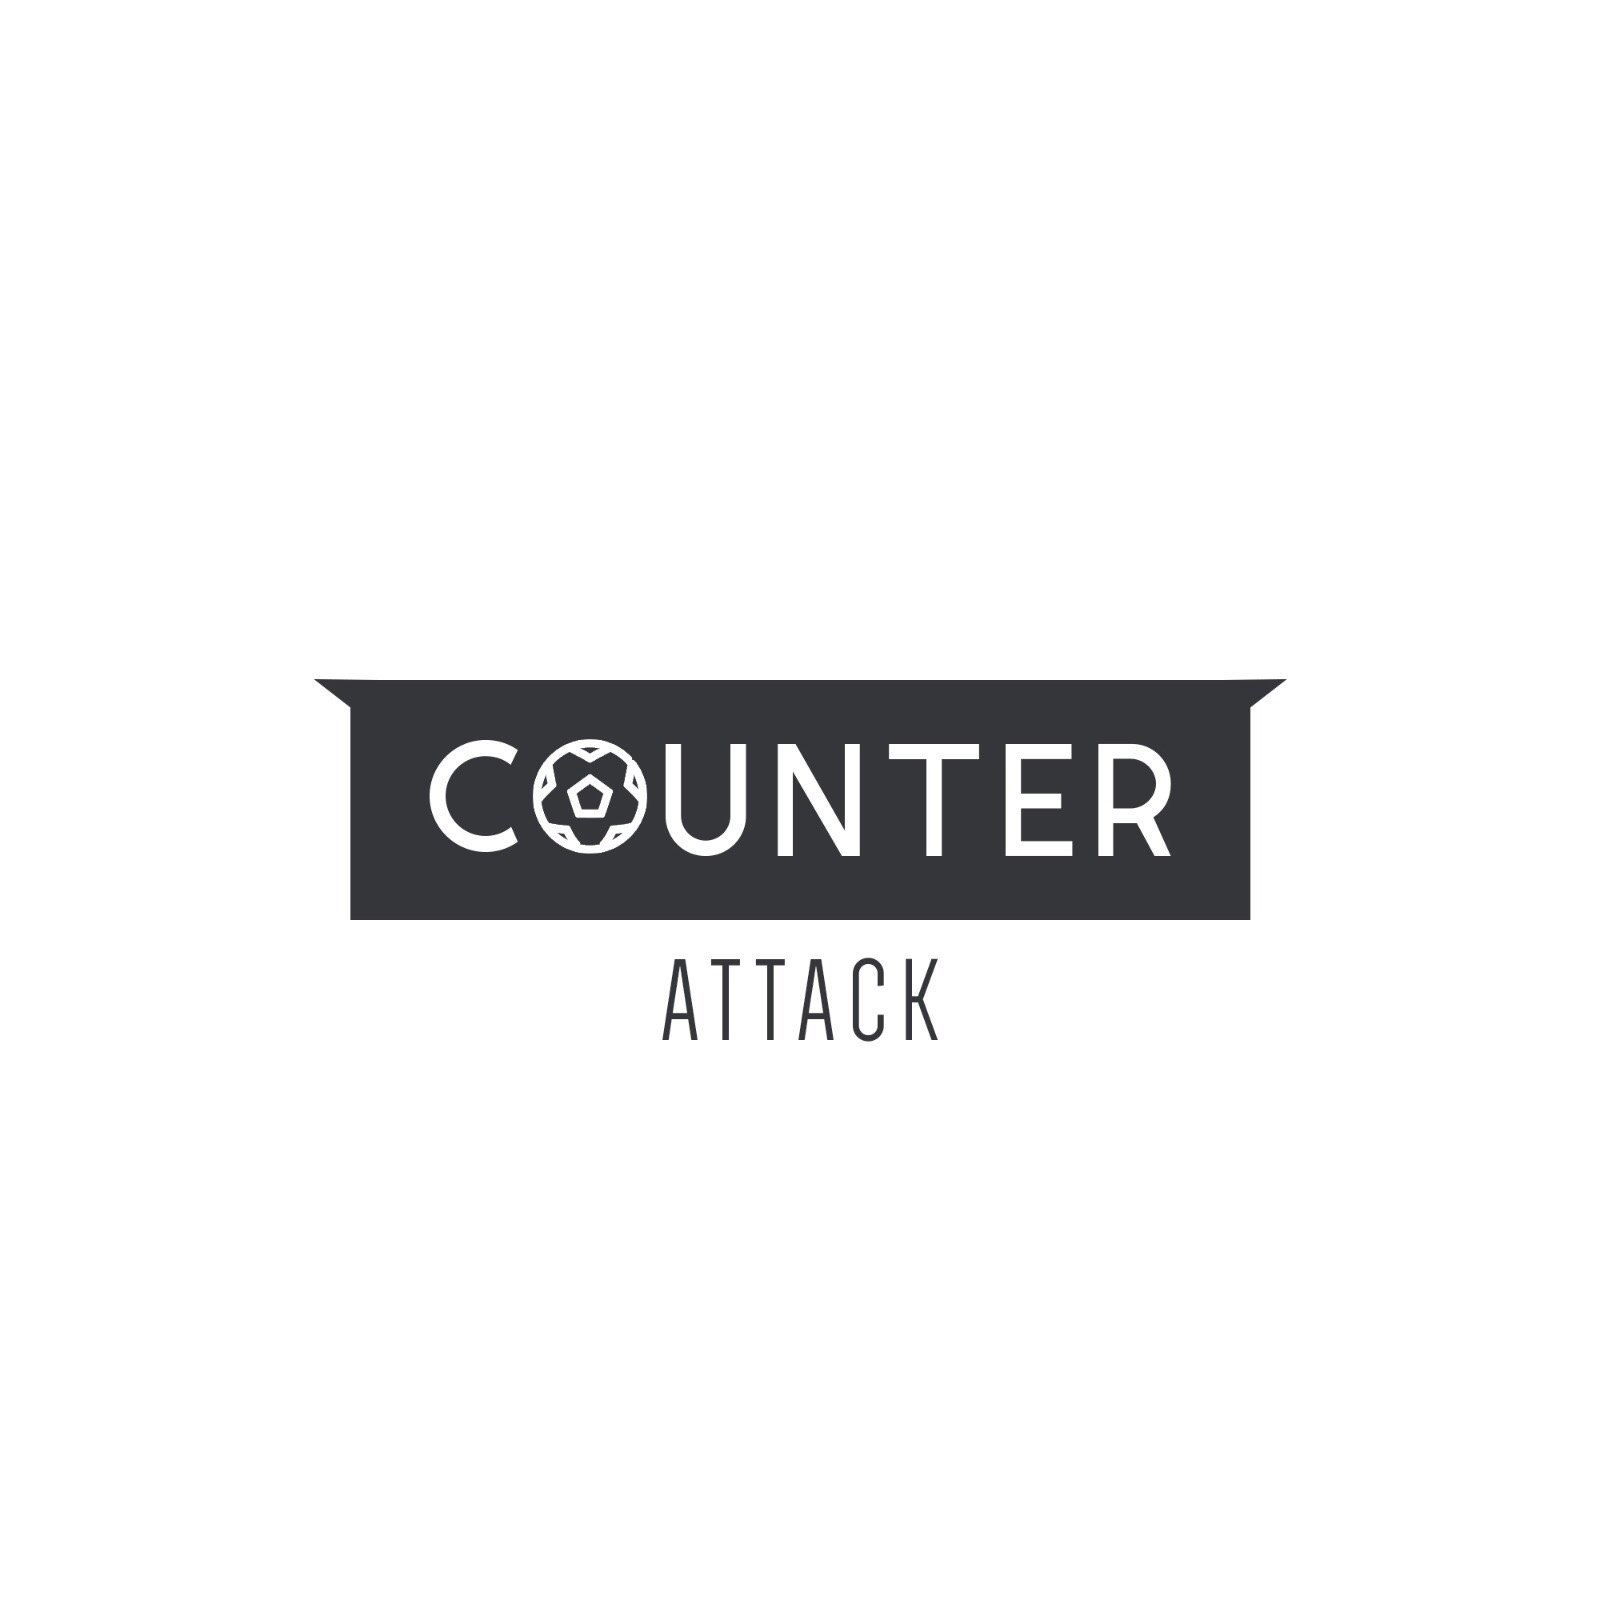 Counter Attack - Episode 63 - A Scorcher of a Season for Spurs